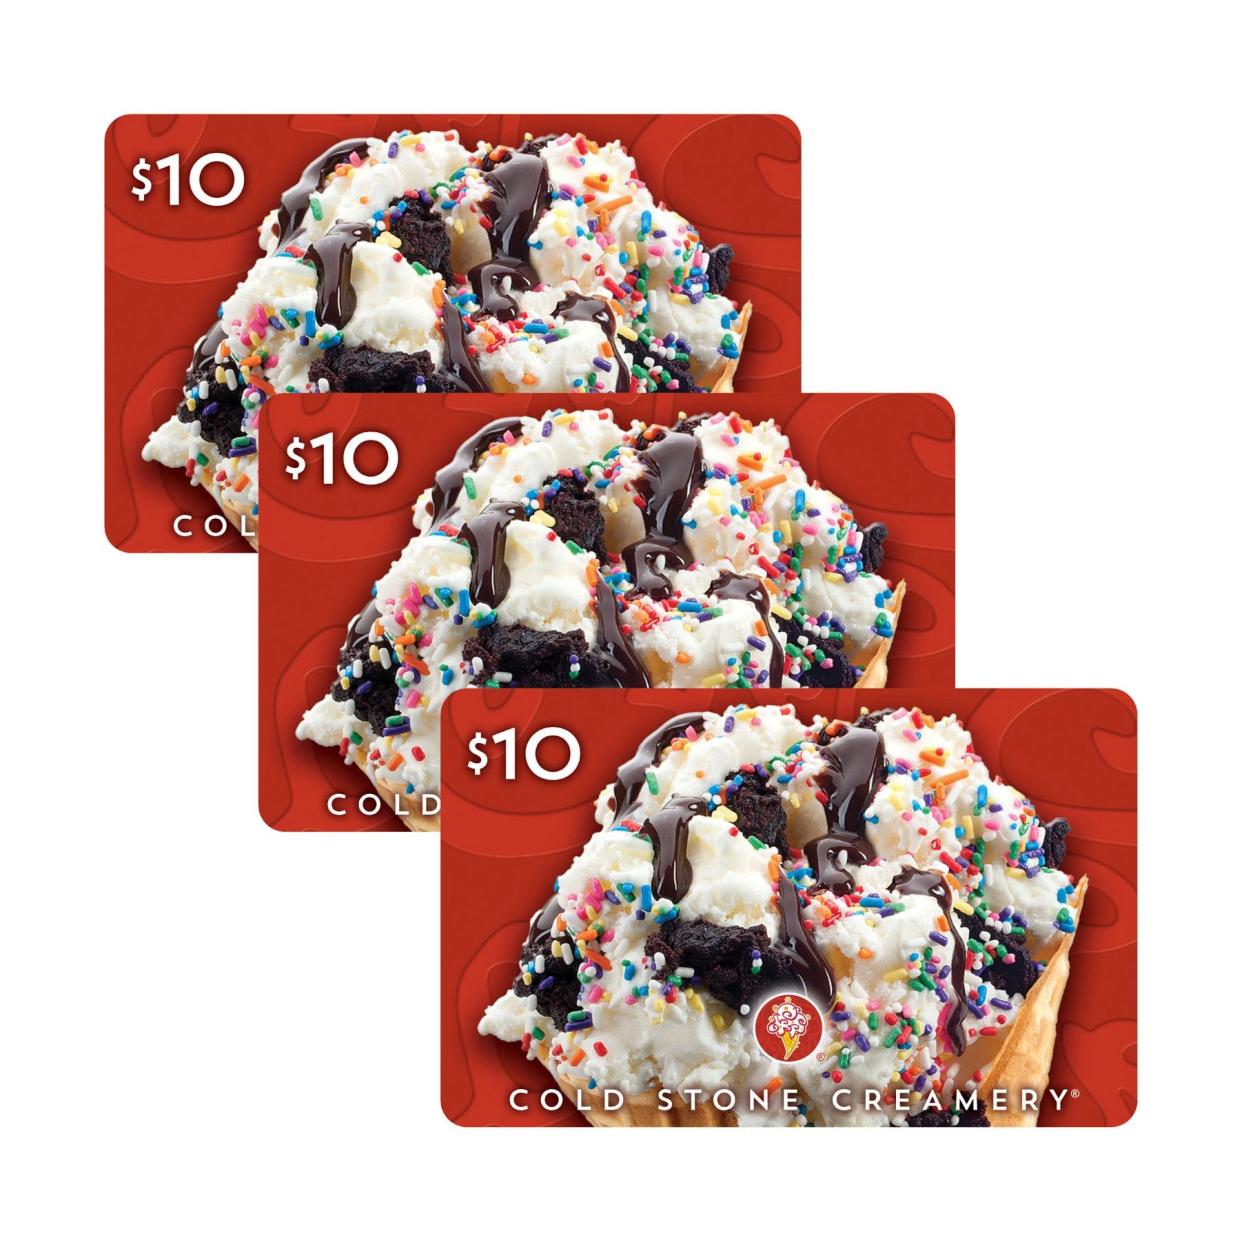 Cold Stone Creamery gift cards